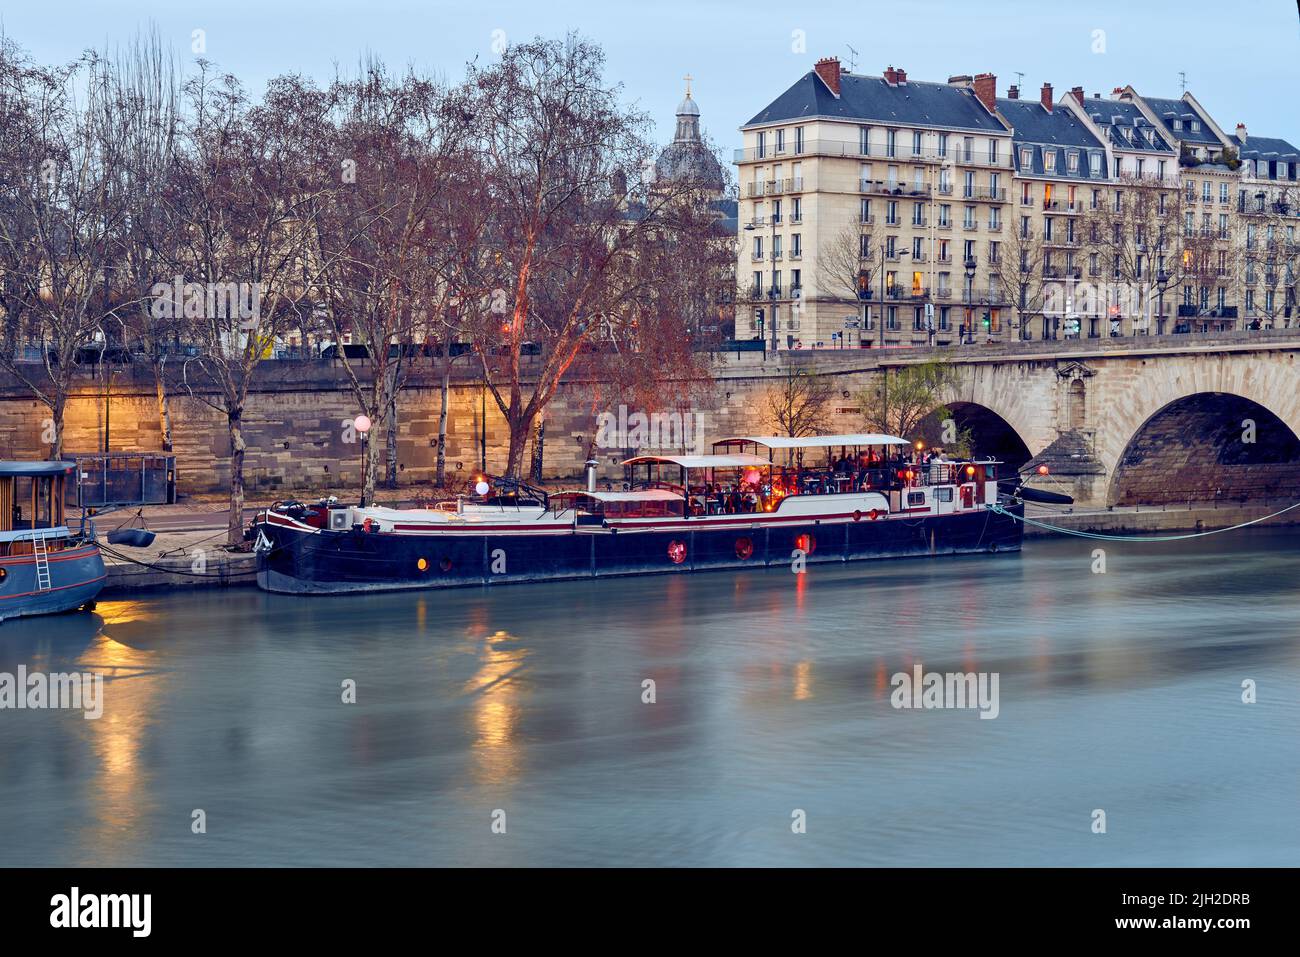 Barge restaurant on the river Seine in Paris Stock Photo